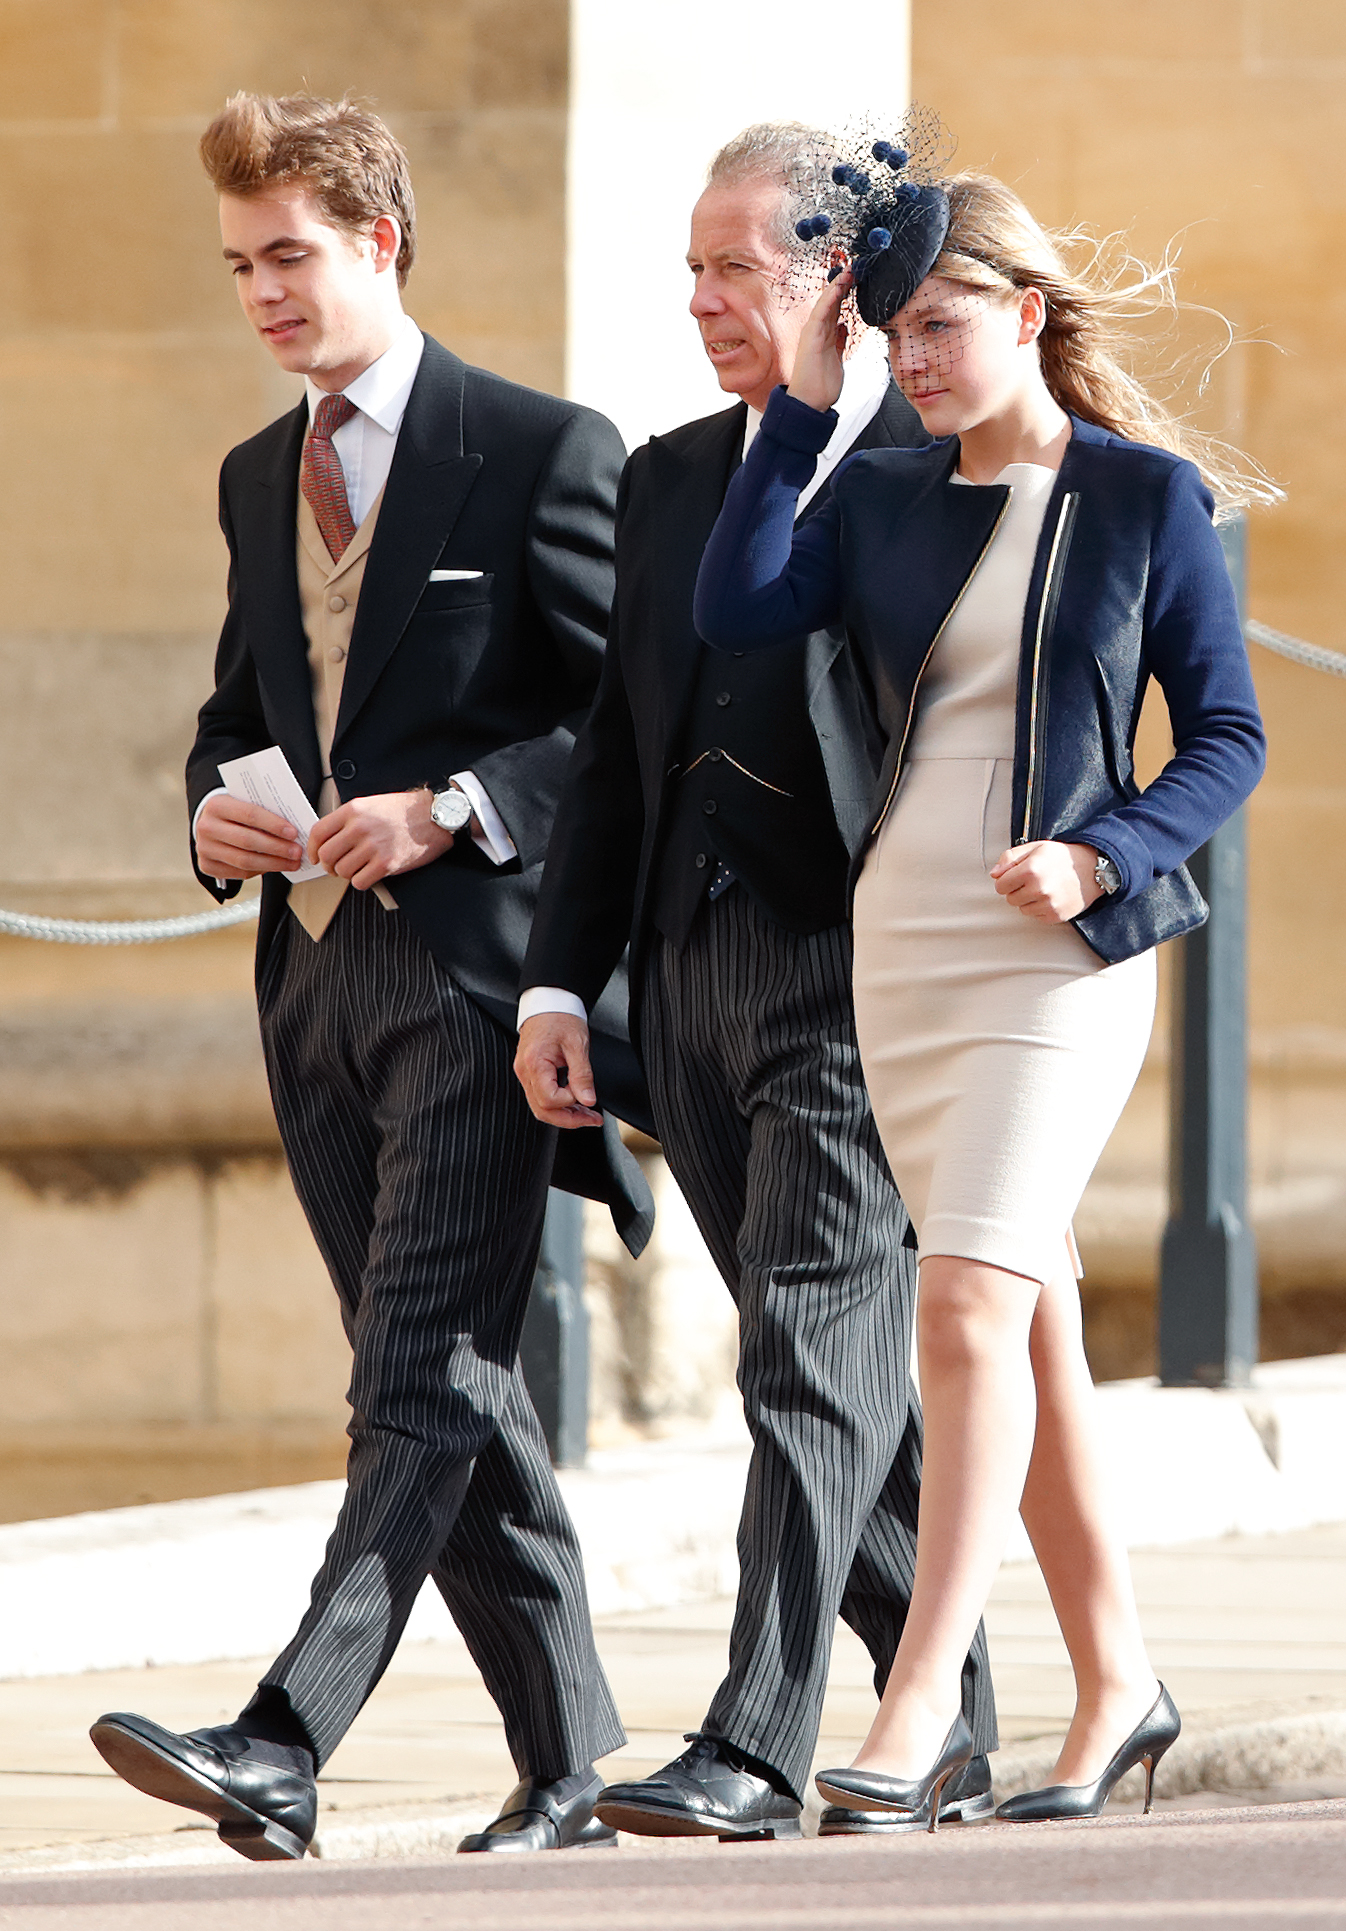 Charles Armstrong-Jones, David Armstrong-Jones and Margarita Armstrong-Jones attend the wedding of Princess Eugenie and Jack Brooksbank at St George's Chapel on October 12, 2018 in Windsor, England. | Source: Getty Images